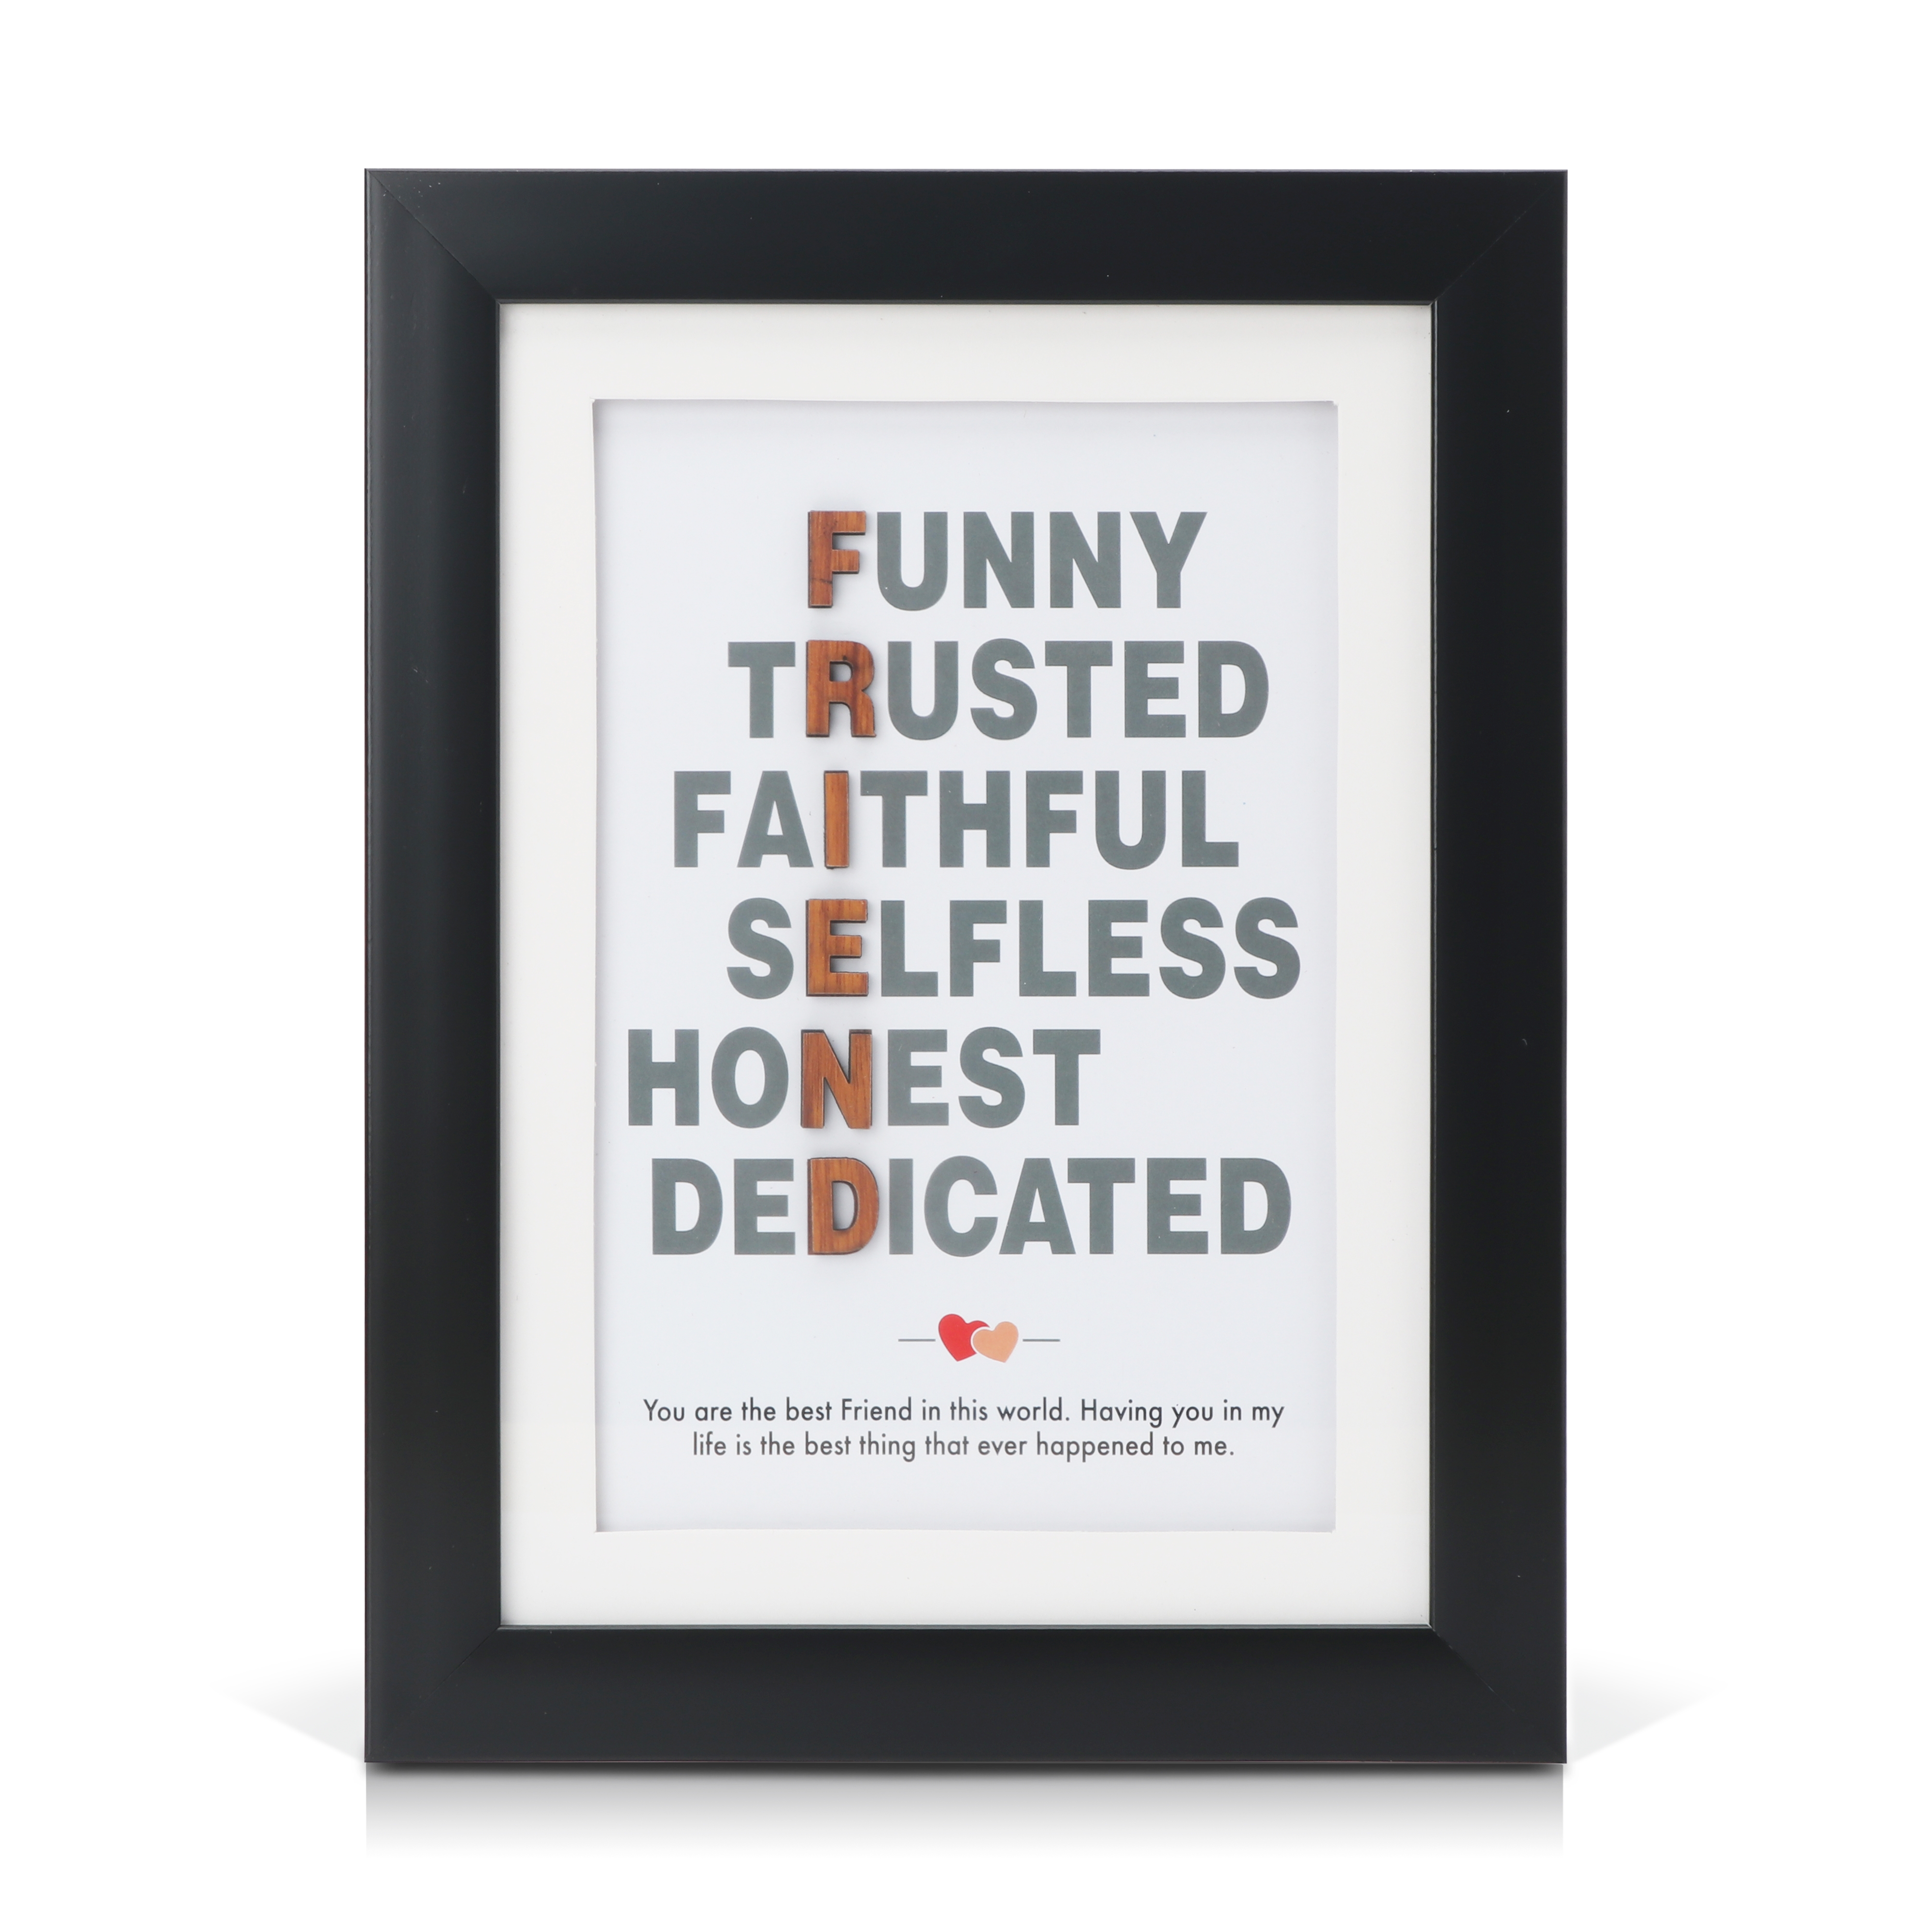 Archies | Archies Quotation Photo Frame with Greeting Card for Friend